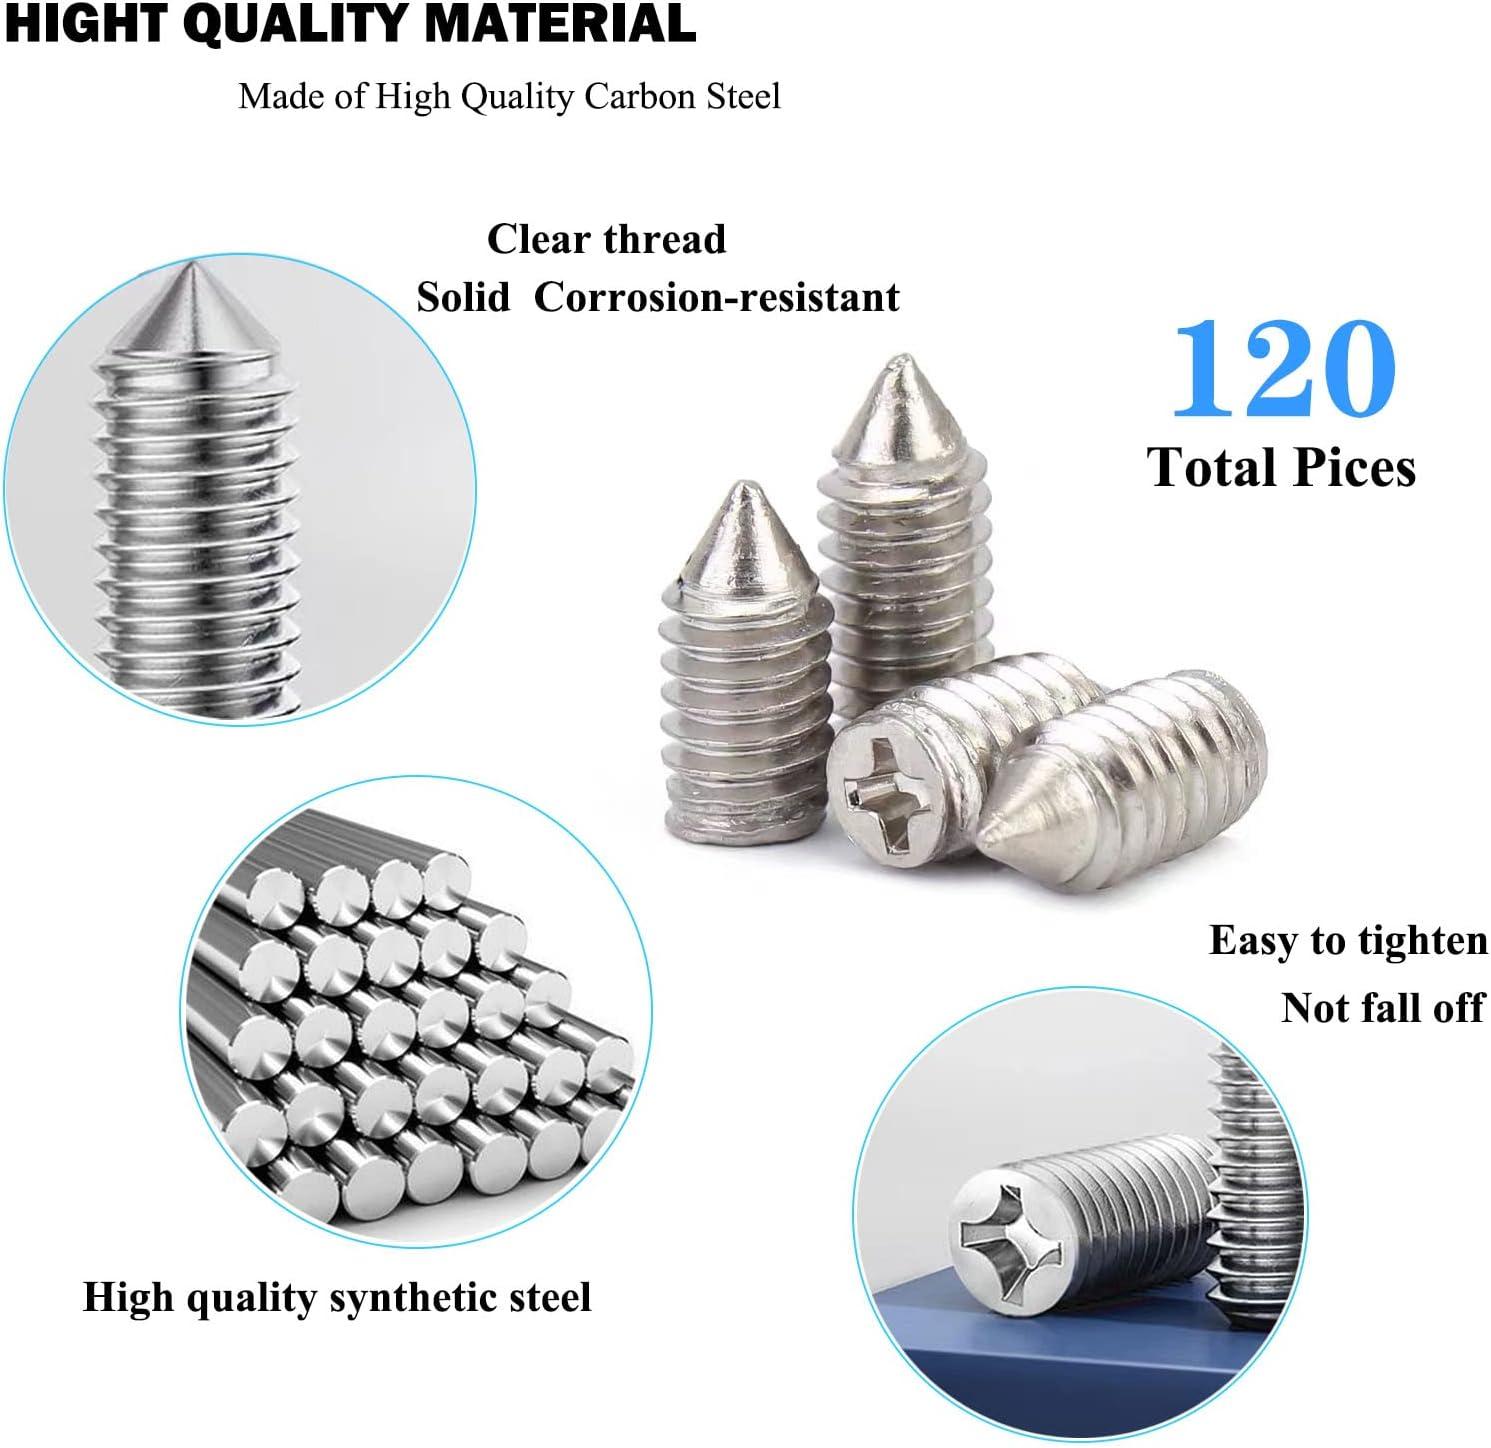 120 pcs Nickel Plated Tip Screws Pointed Cross Slot Leather Accessories 12  Sizes Belt Screws Include M2*3-M2*6, M2.5 * 3-M2.5 * 8, M3*3-M3*8 with 2mm  Screwdriver for Belt Buckle Wallet Handbag Purse